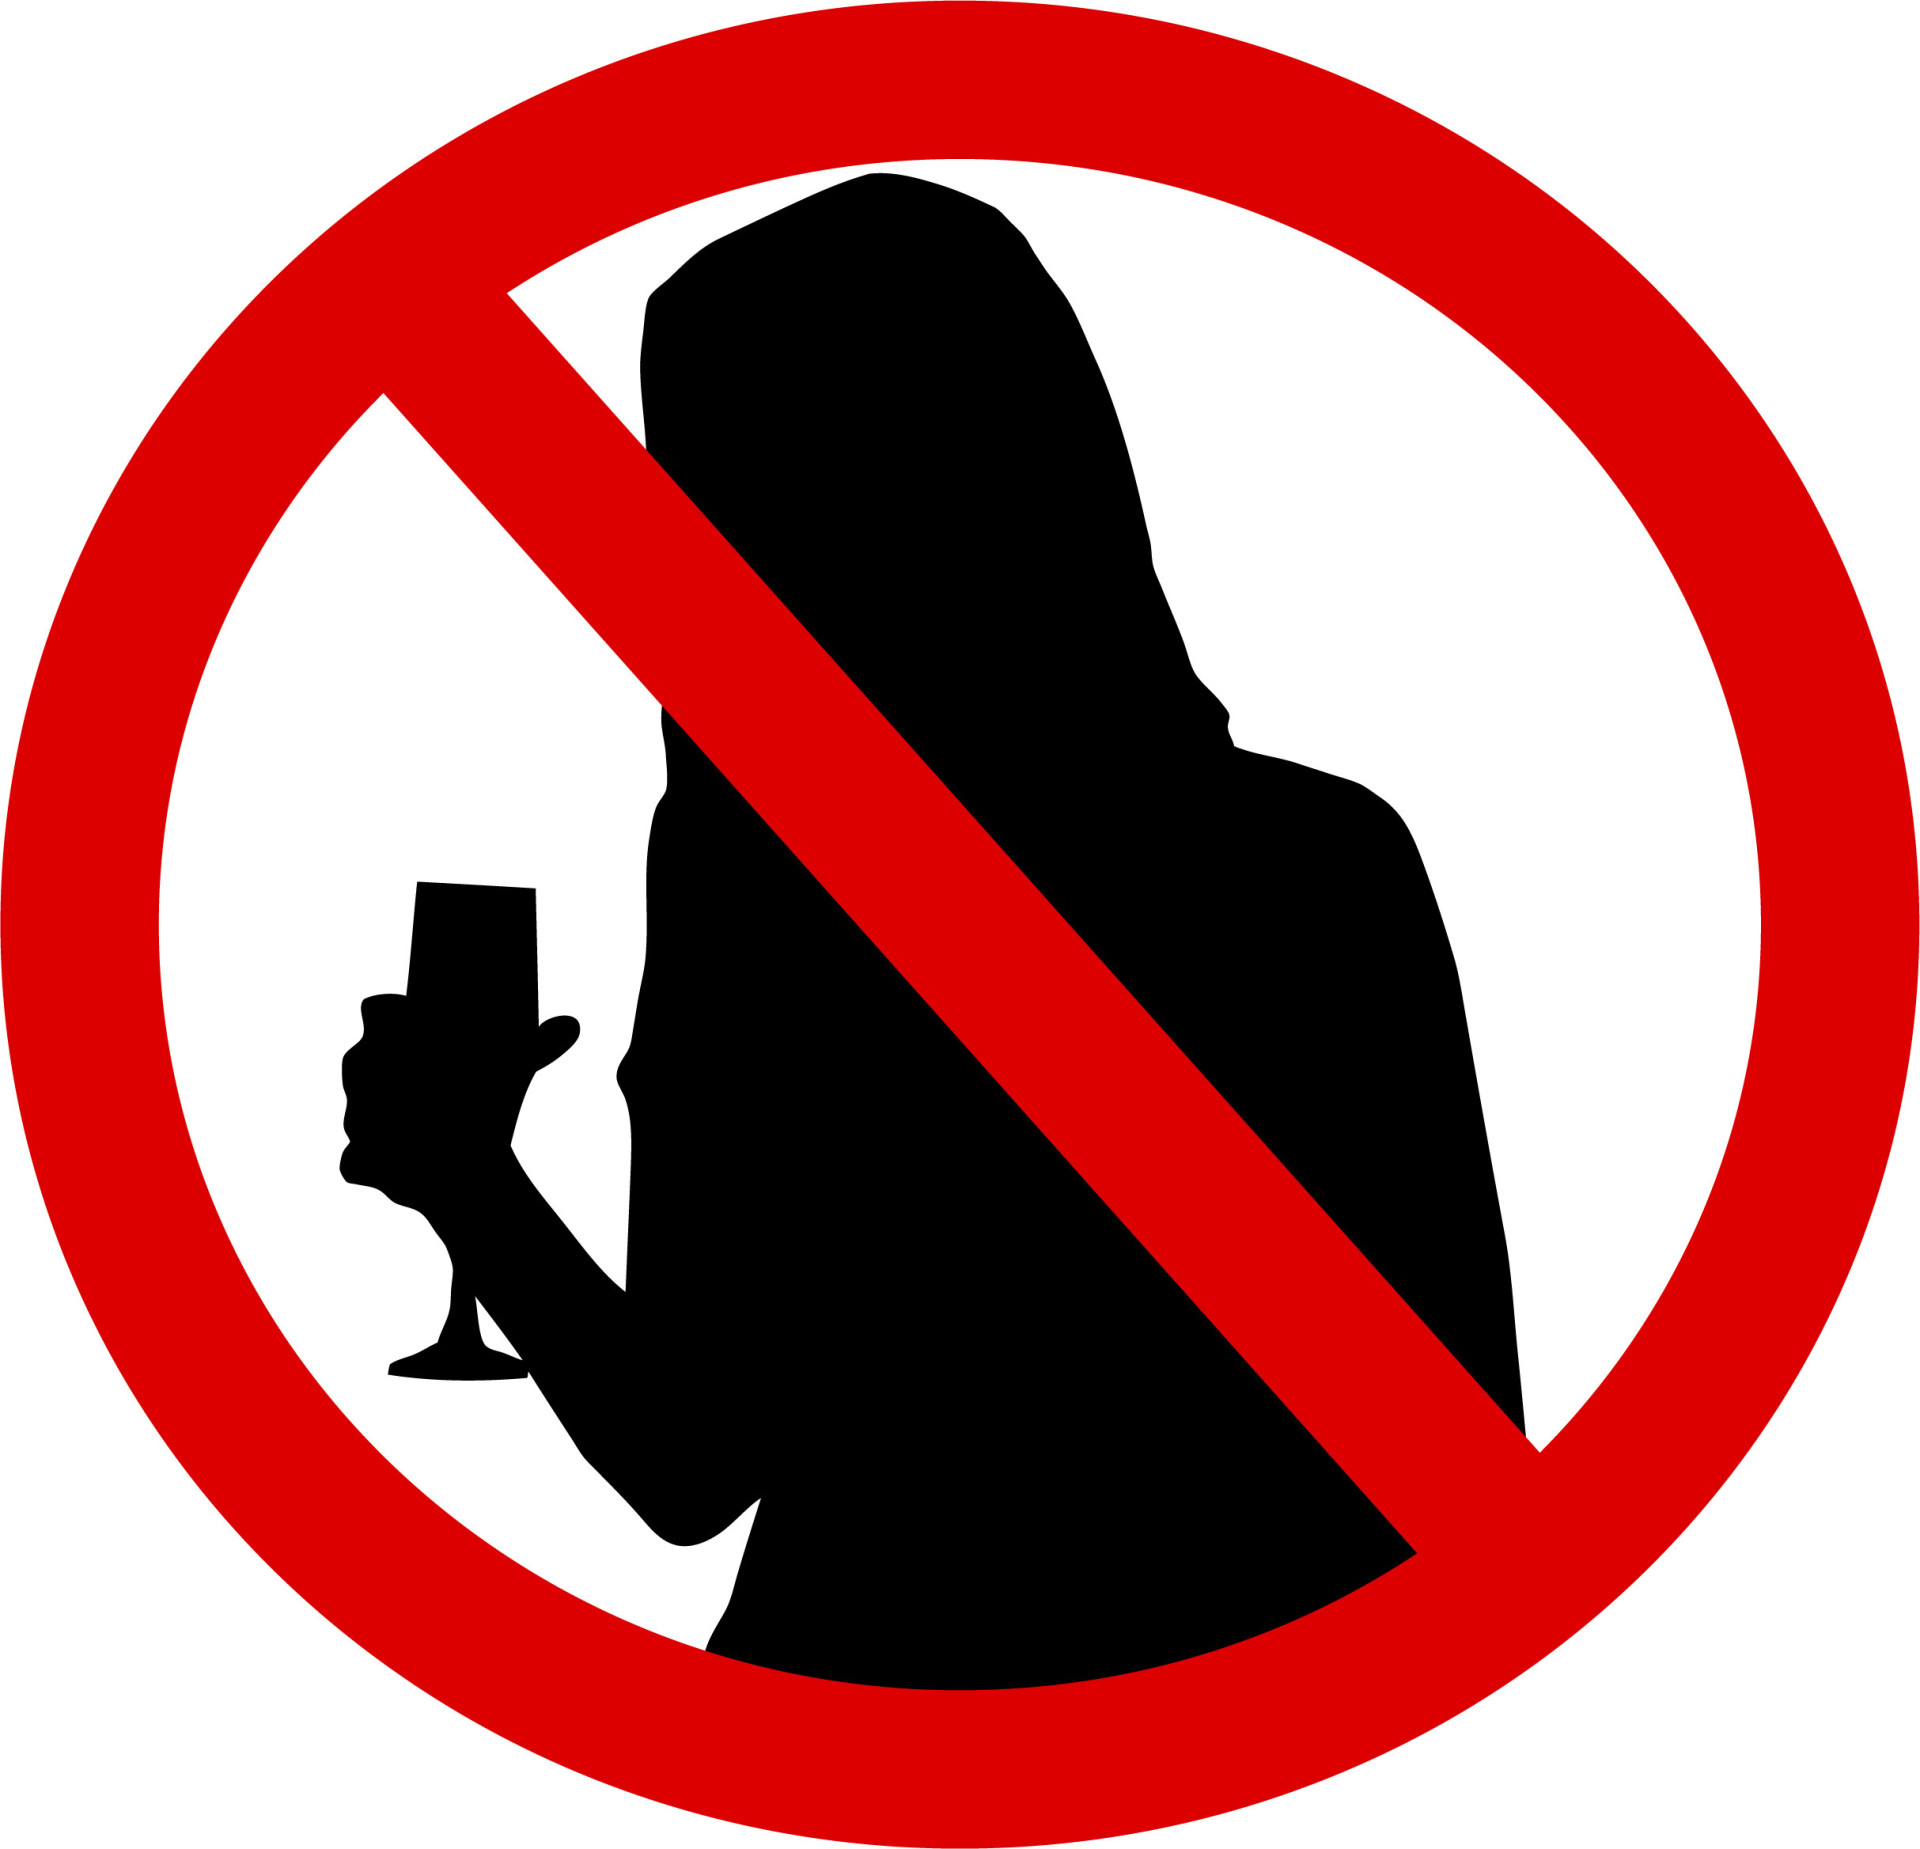 It may be prohibited to drink alcohol in certain places. The same as with smoking, it's important to look out for signs.<p><a href="https://www.msn.com/en-us/community/channel/vid-7xx8mnucu55yw63we9va2gwr7uihbxwc68fxqp25x6tg4ftibpra?cvid=94631541bc0f4f89bfd59158d696ad7e">Follow us and access great exclusive content every day</a></p>